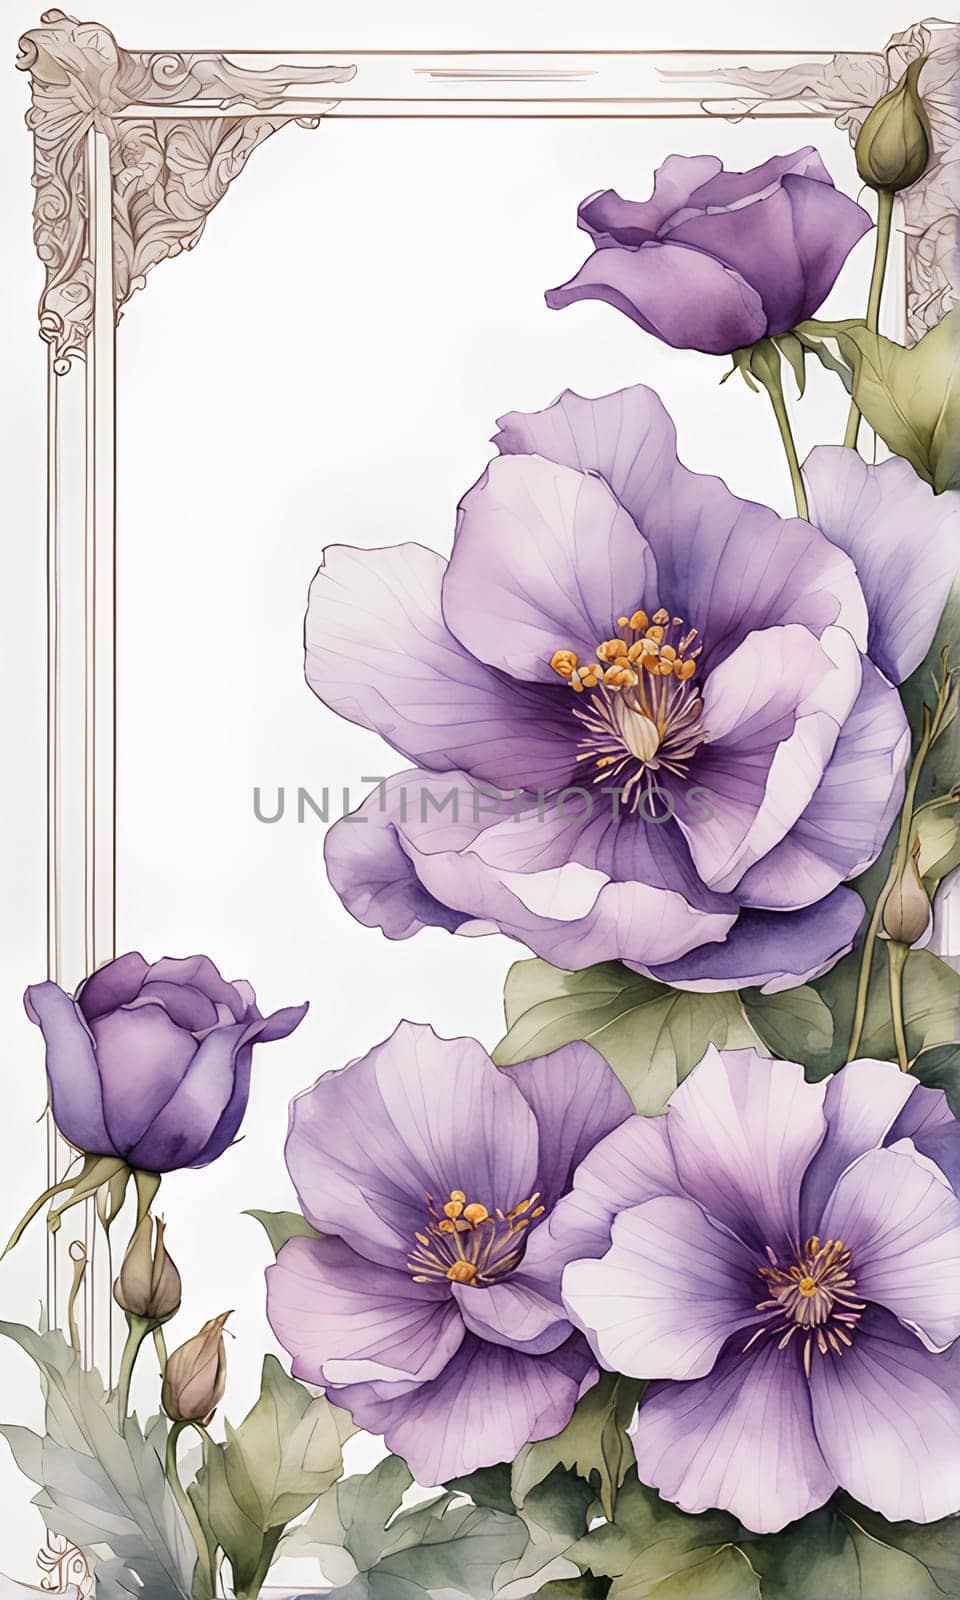 Framing purple flowers on white background with copy space; watercolor illustration by Annu1tochka